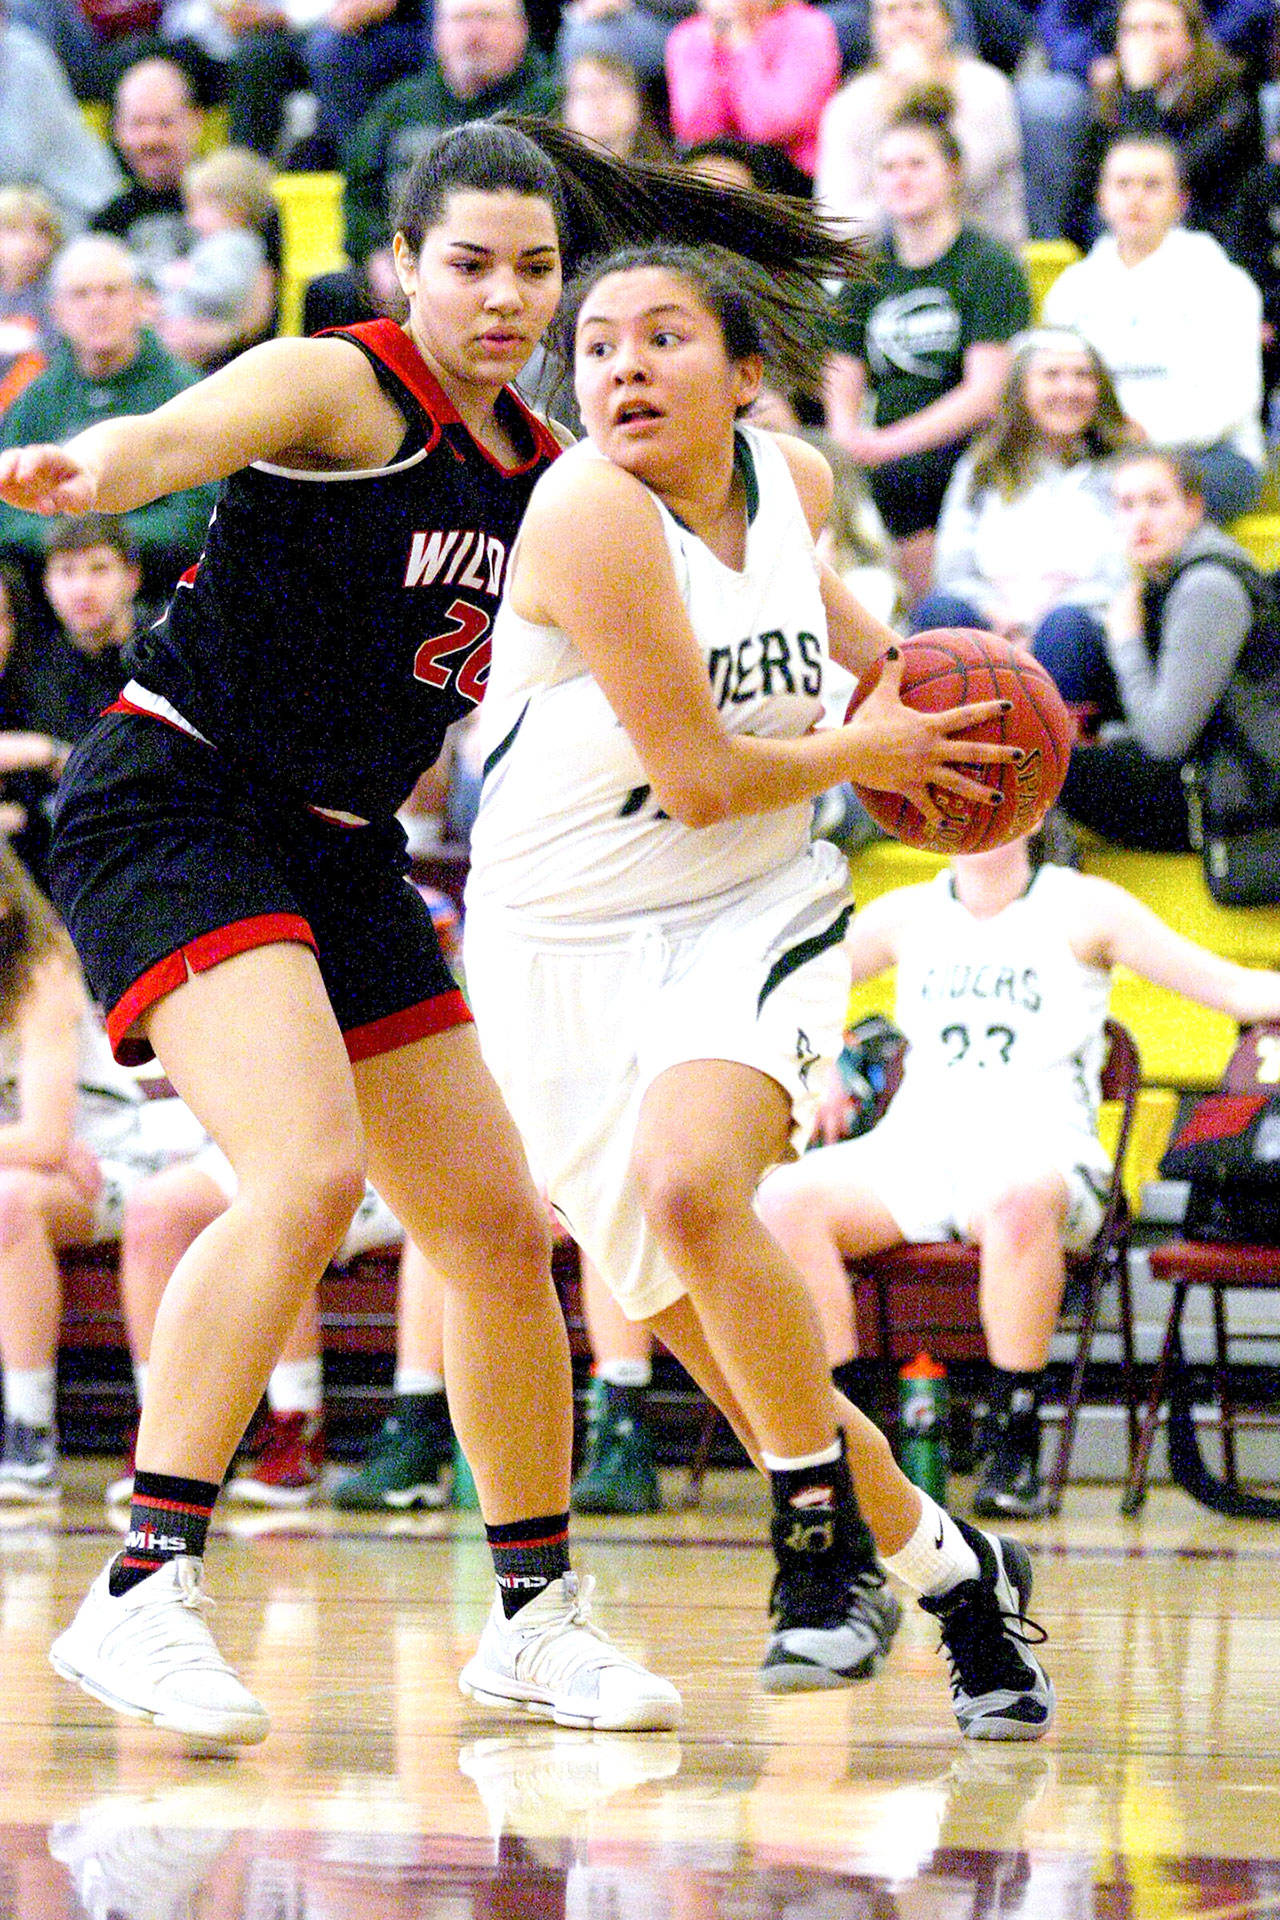 Port Angeles’ Cheyenne Wheeler looks to drive against Archbishop Thomas Murphy’s Julia Lucas in their 2A Regionals game Saturday at Mount Tahoma High School in Tacoma. ATM won 50-36, but the Riders will move to play at the 2A state tournament Wednesday. (David Willoughly/for Peninsula Daily News)